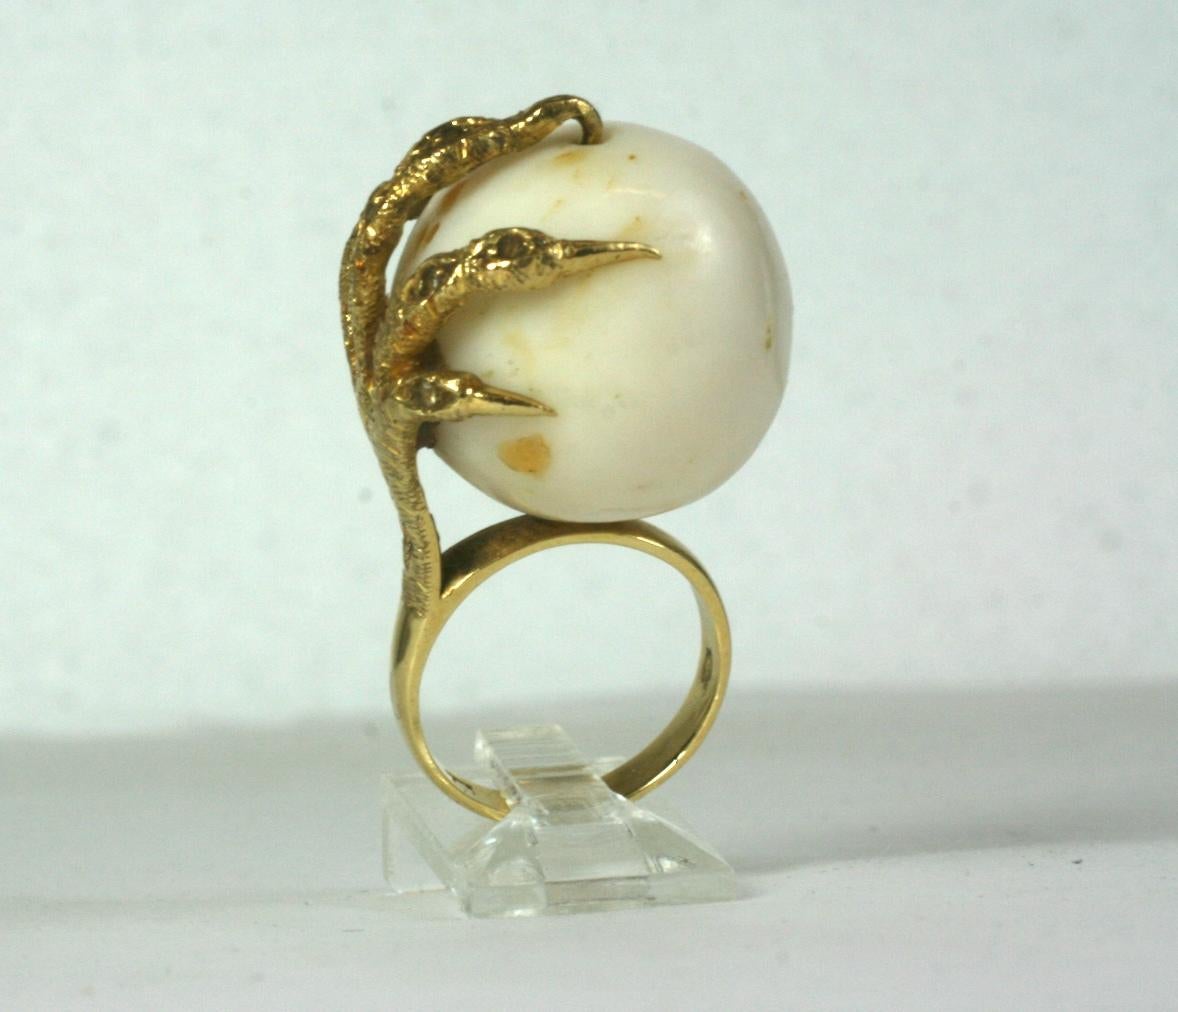 Amazing Coral Claw Ring from the 1970's with a massive white coral bead set in an 18k textured claw formed mount set with tiny diamond chips throughout.  Size 6. Bead 20mm. 1970's Italy. 
DOMESTIC SALES ONLY.